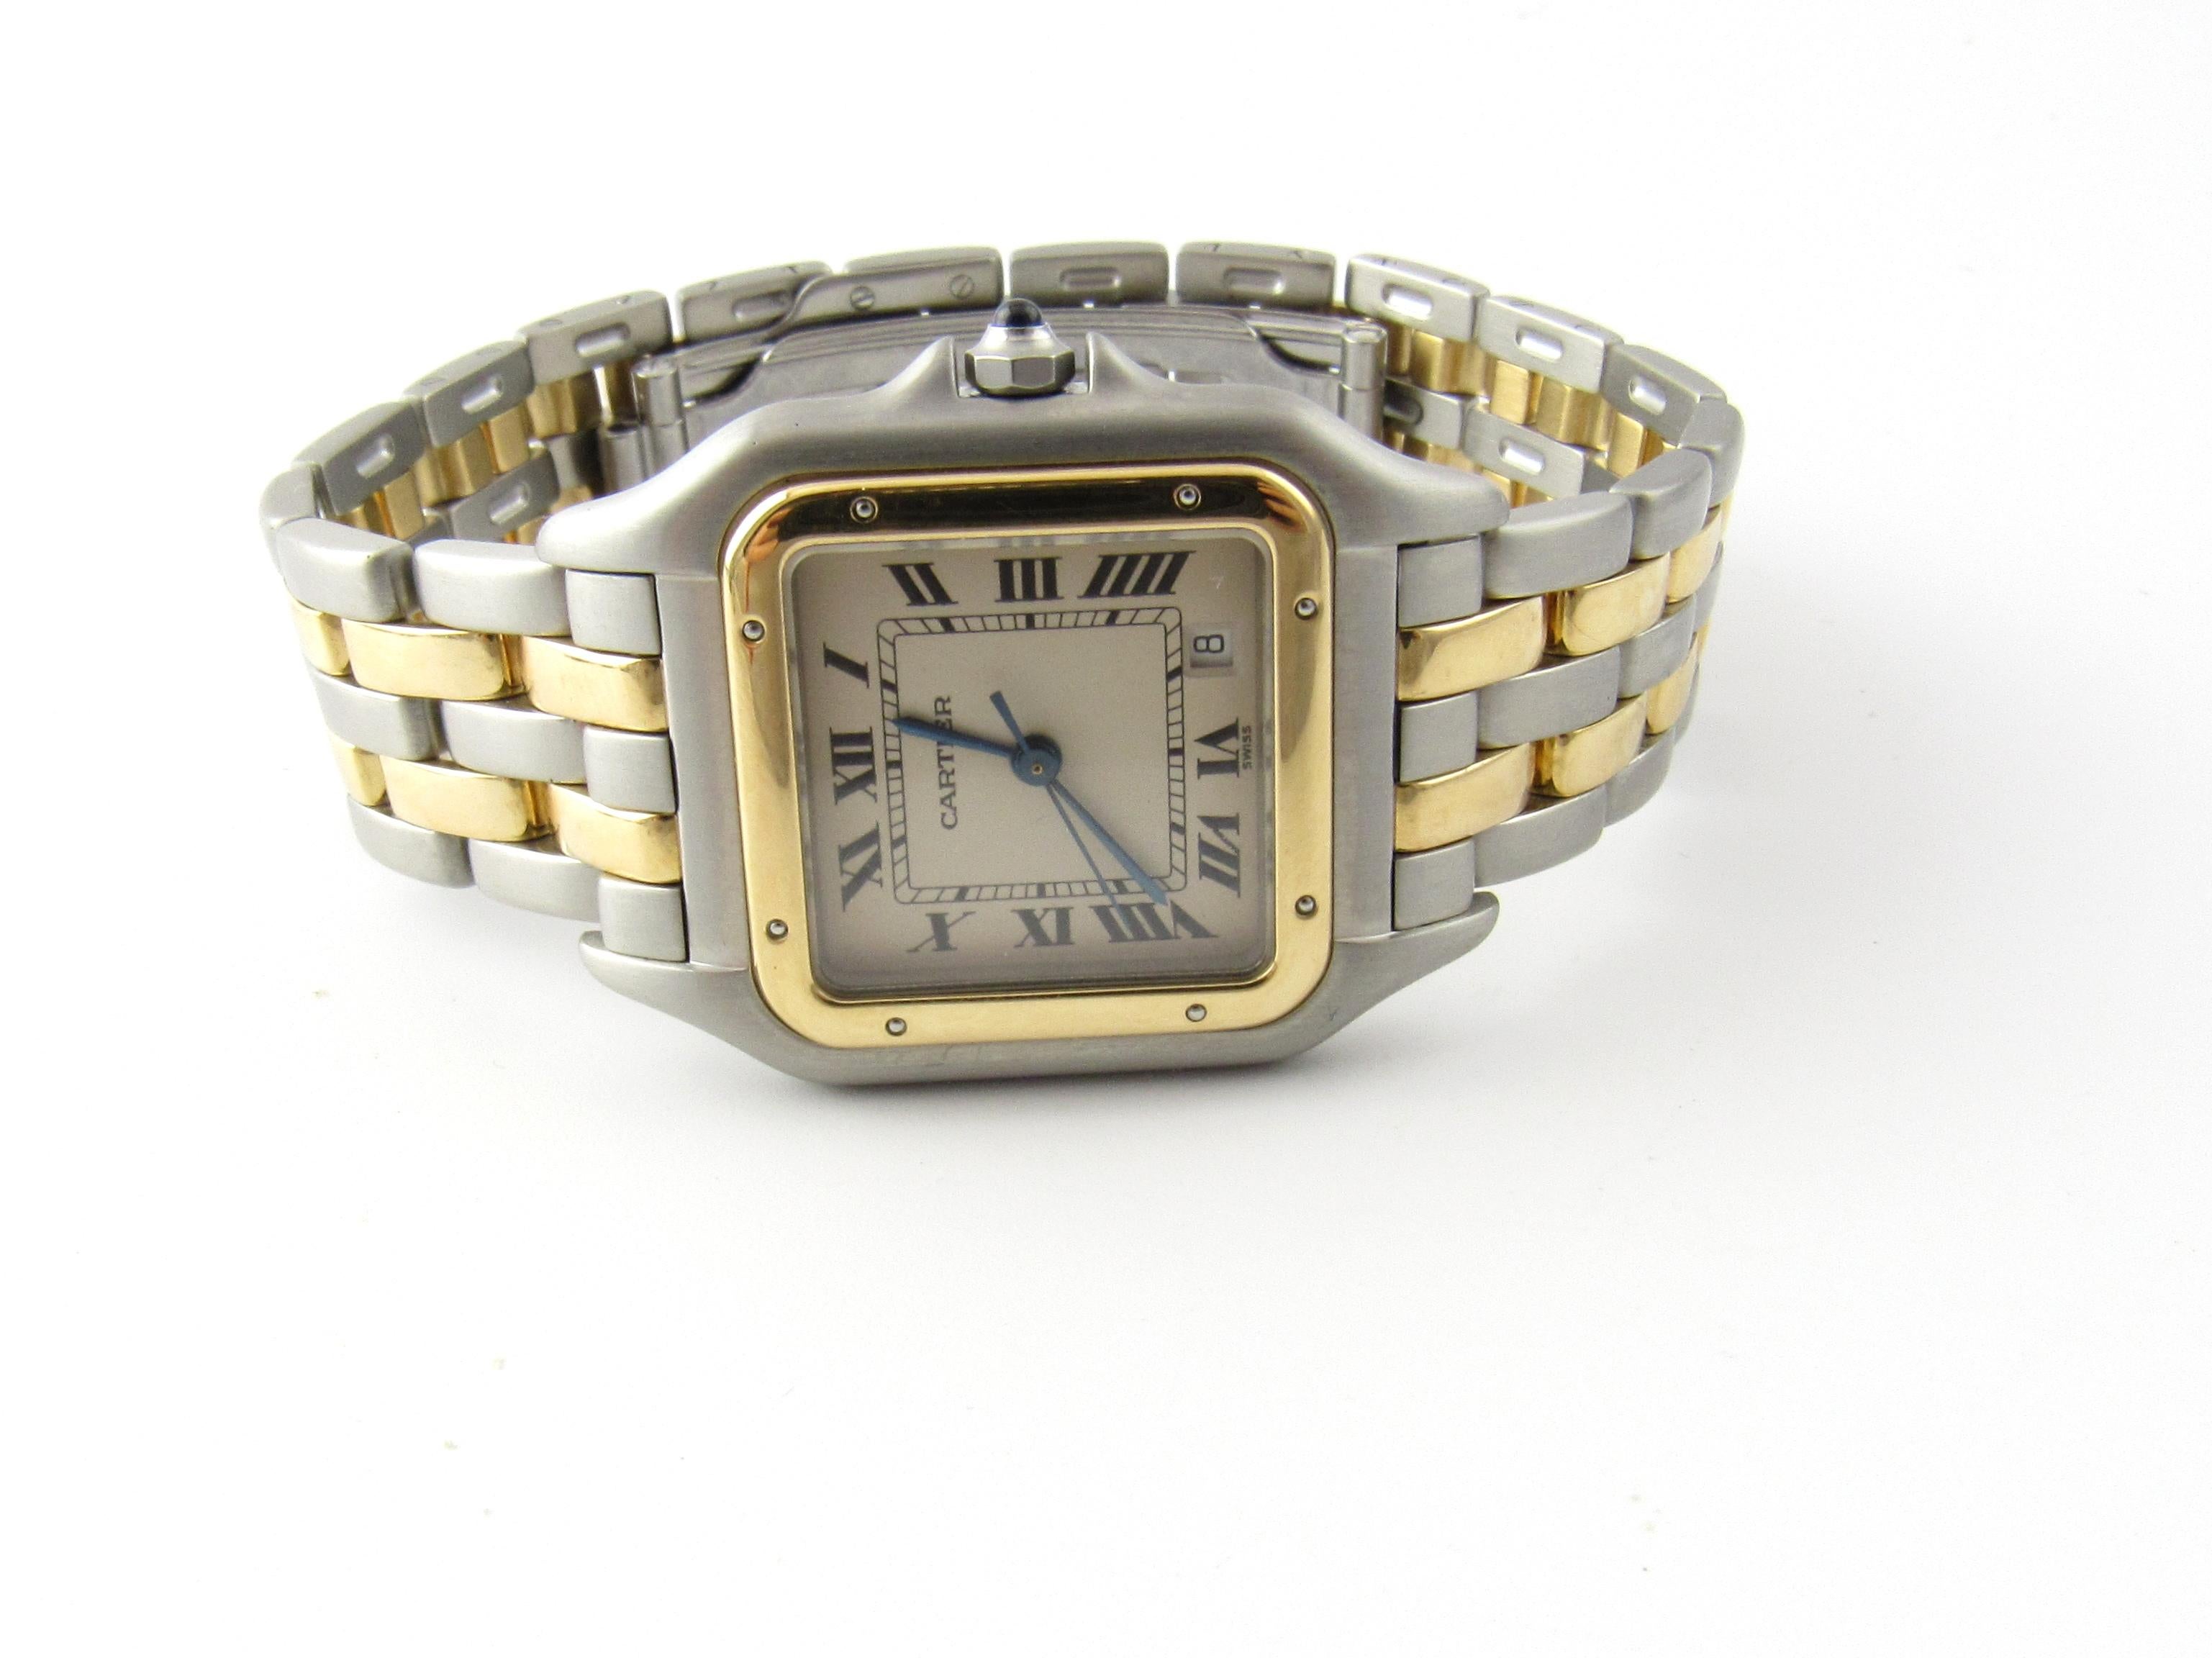 Cartier Panthere Watch with Date

circa 1980's

This authentic Panthere watch is approx. 6 3/4